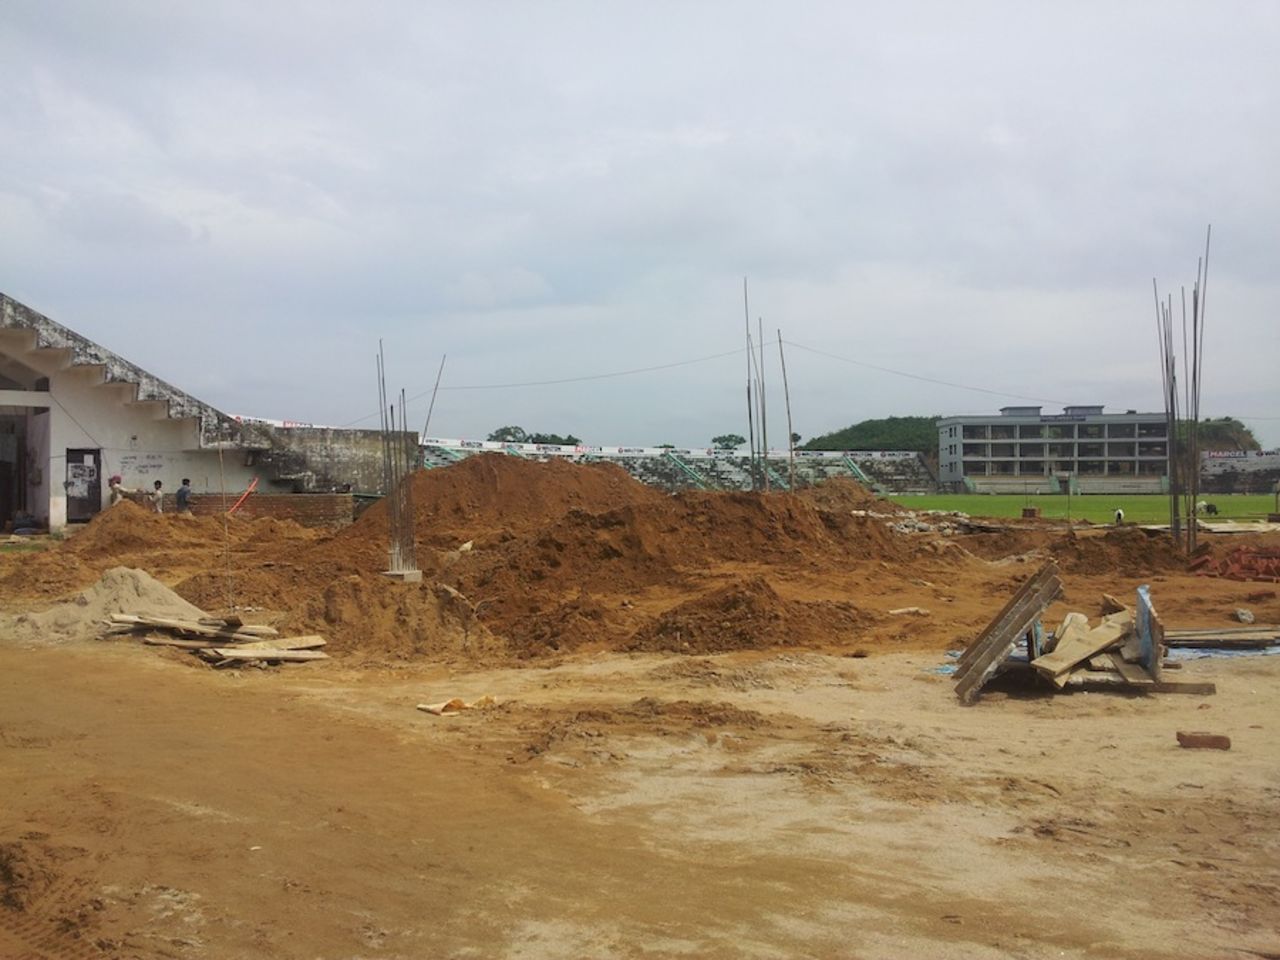 The Sylhet stadium, which needs to be ready for the World T20 next year, is under-construction, Sylhet, July 2, 2013